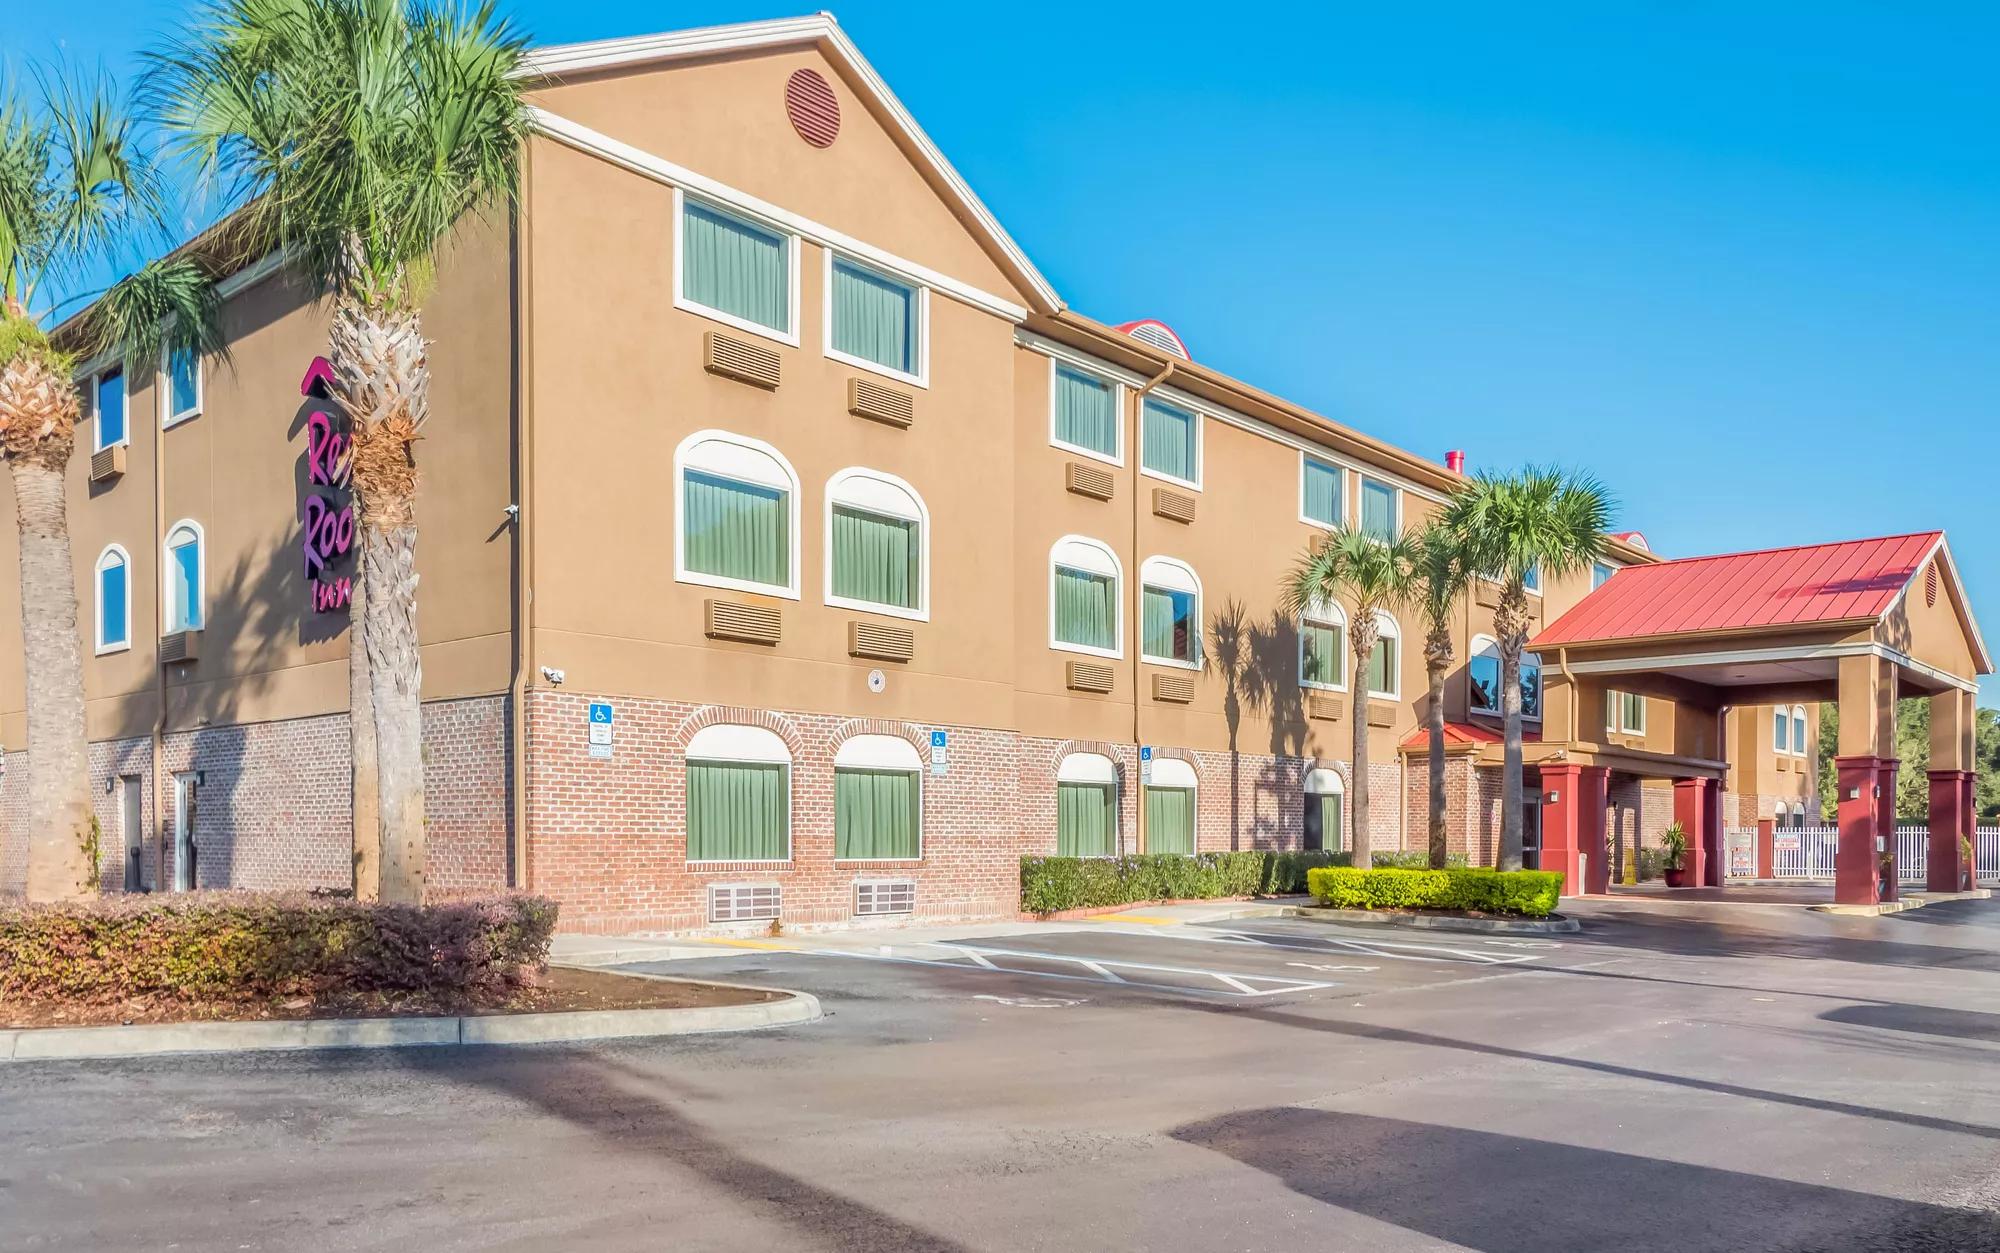 Red Roof Inn Ocala Property Exterior Image